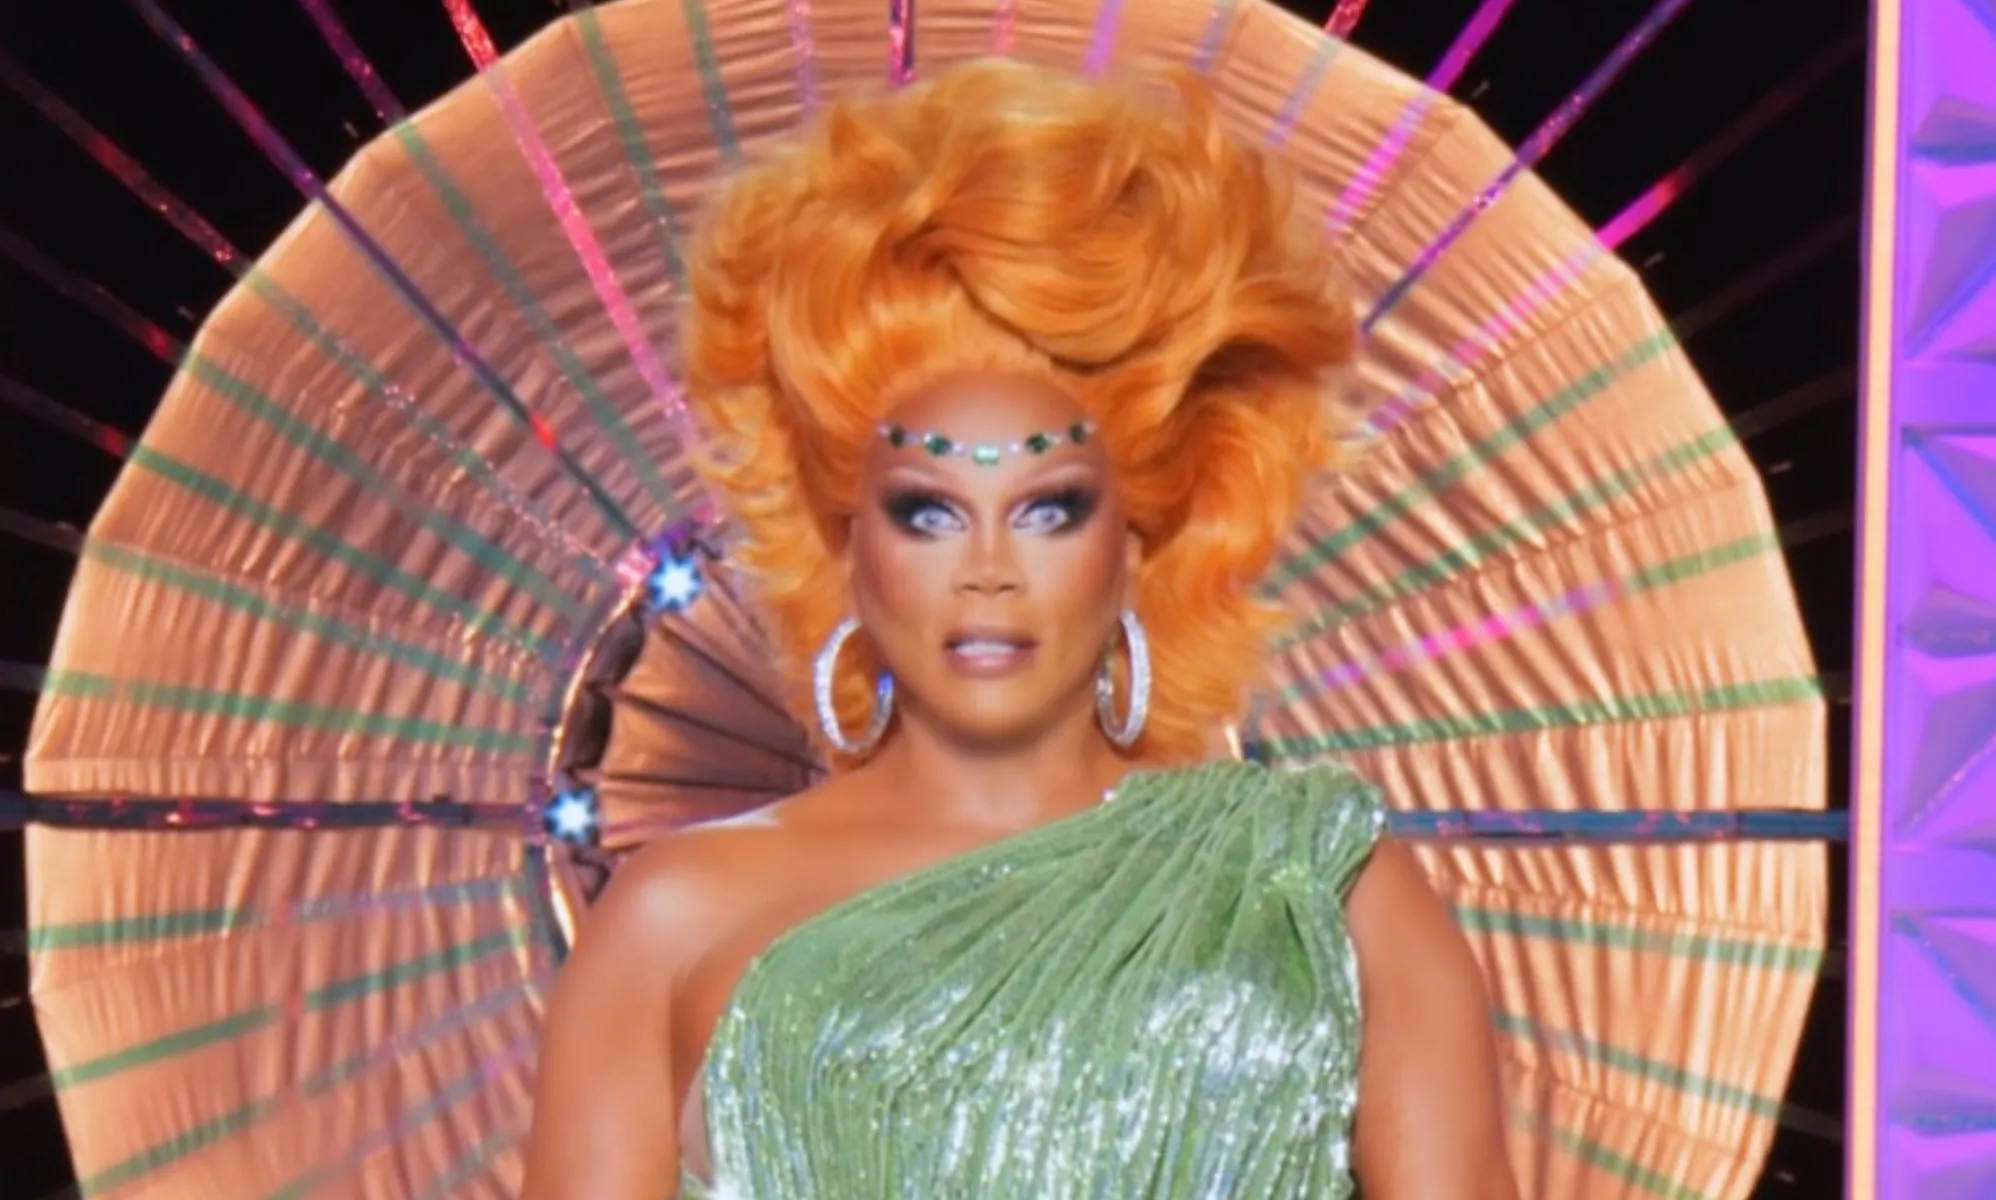 Drag Race fans fall for April Fool’s Day post about major changes to show